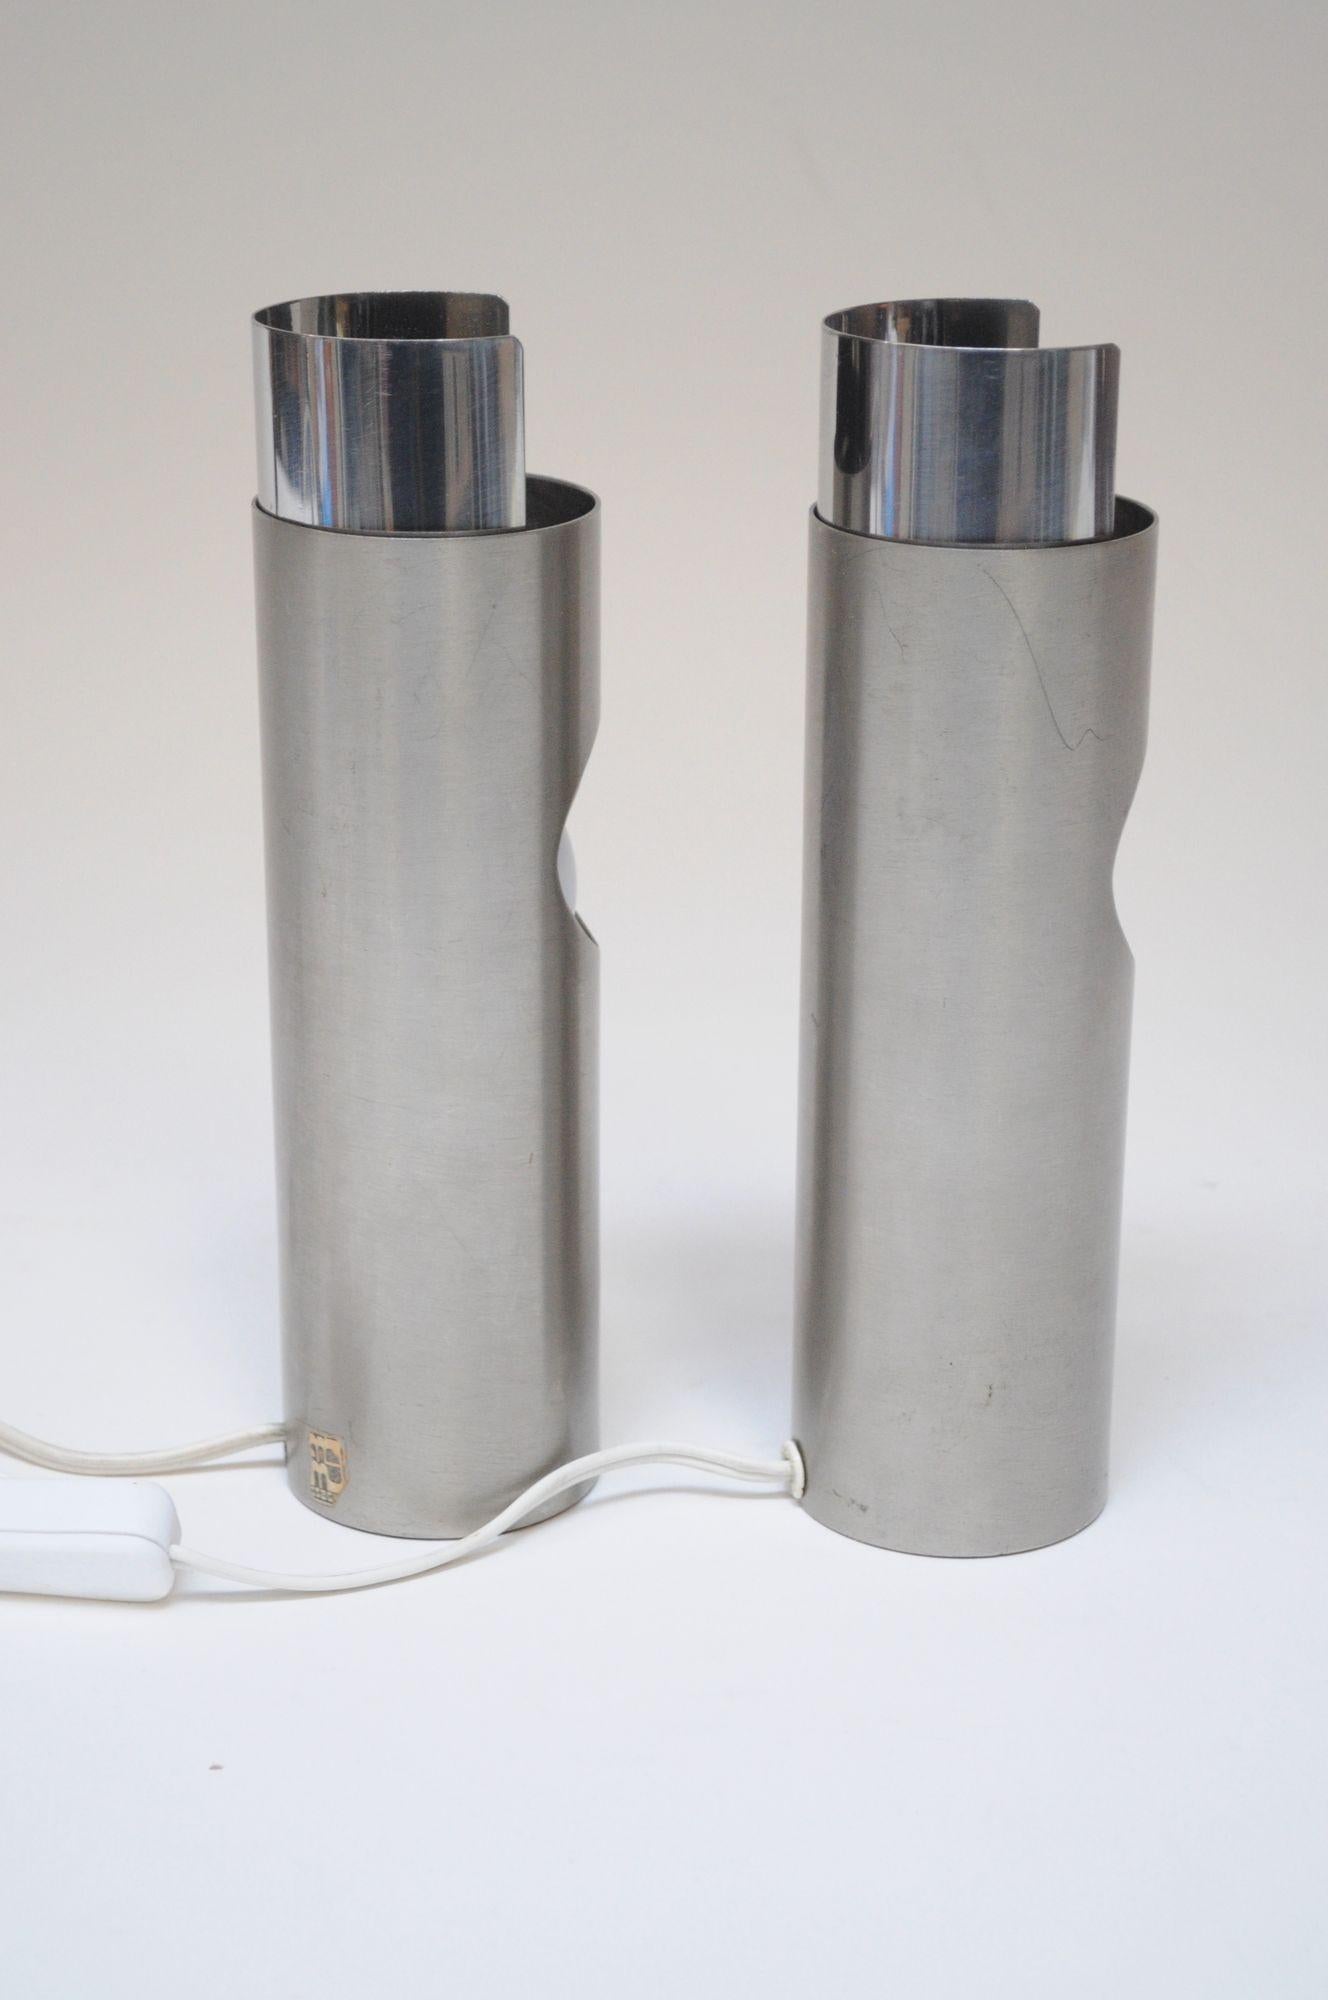 Pair of Small Italian Cylindrical Aluminum Bedside Lamps by Gaetano Missaglia In Good Condition For Sale In Brooklyn, NY